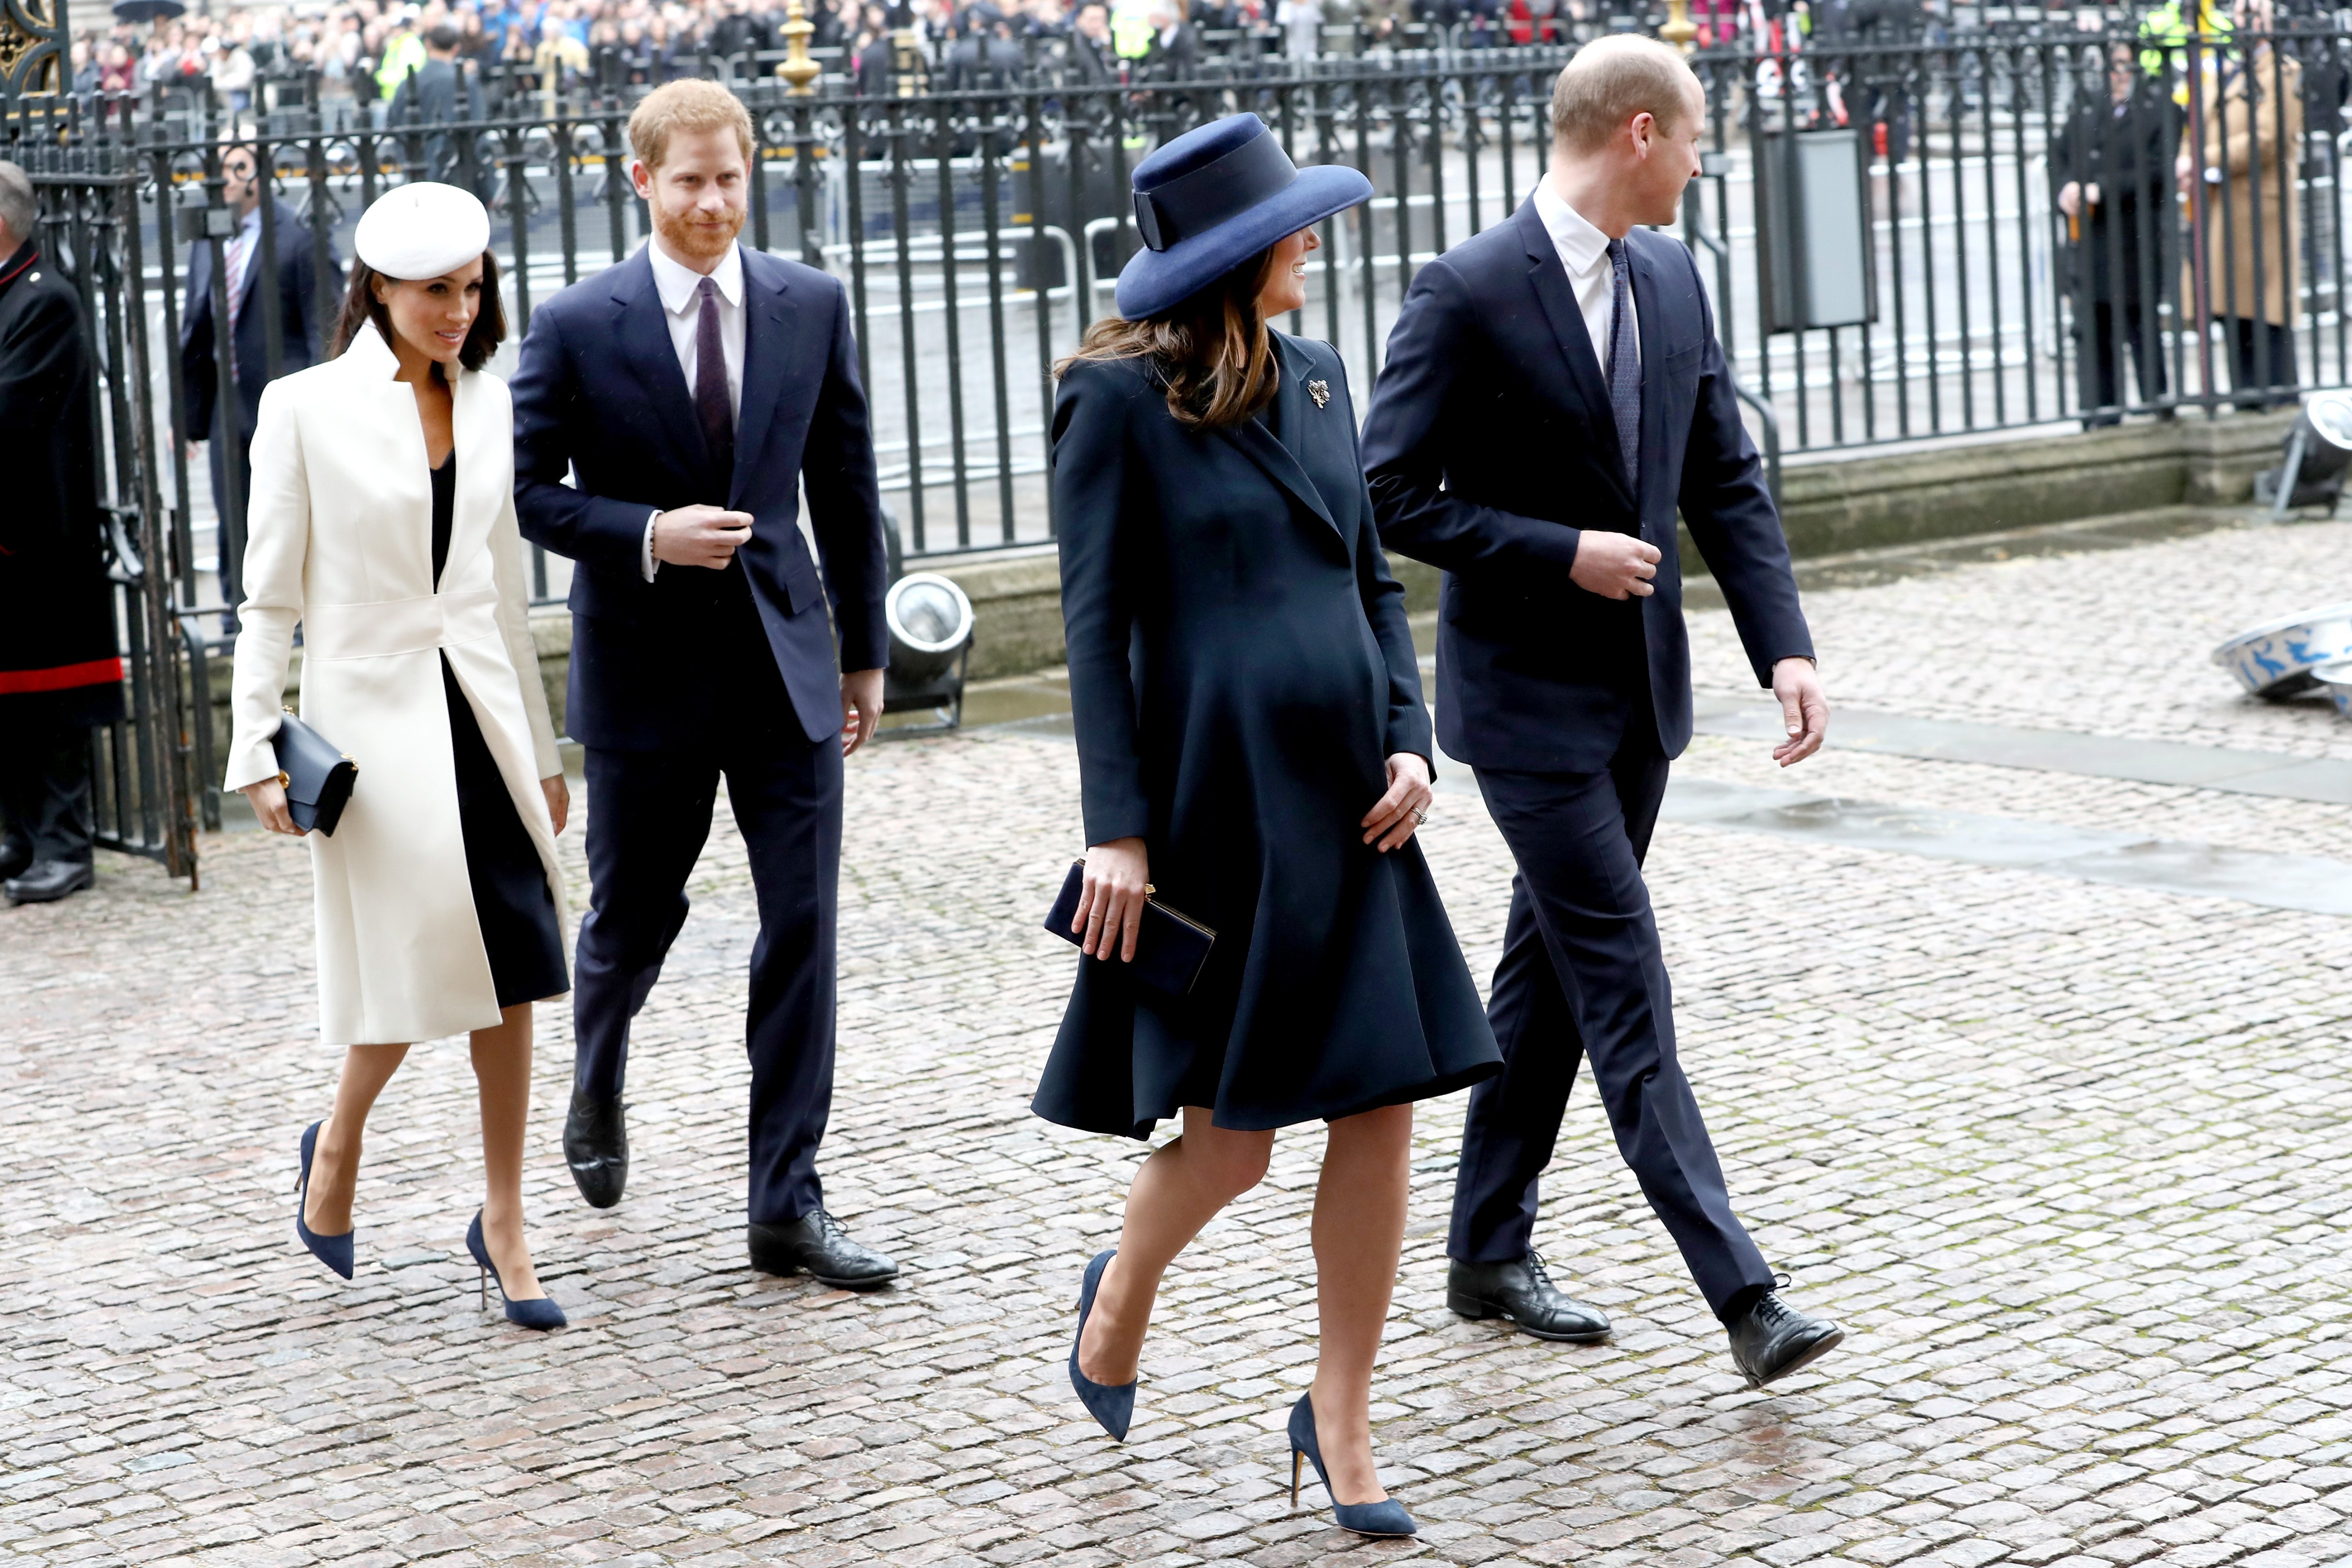 Meghan Markle, Prince Harry, Catherine, Duchess of Cambridge and Prince William, Duke of Cambridge attend the 2018 Commonwealth Day service at Westminster Abbey on March 12, 2018 in London, England. (Chris Jackson—Chris Jackson/Getty Images)